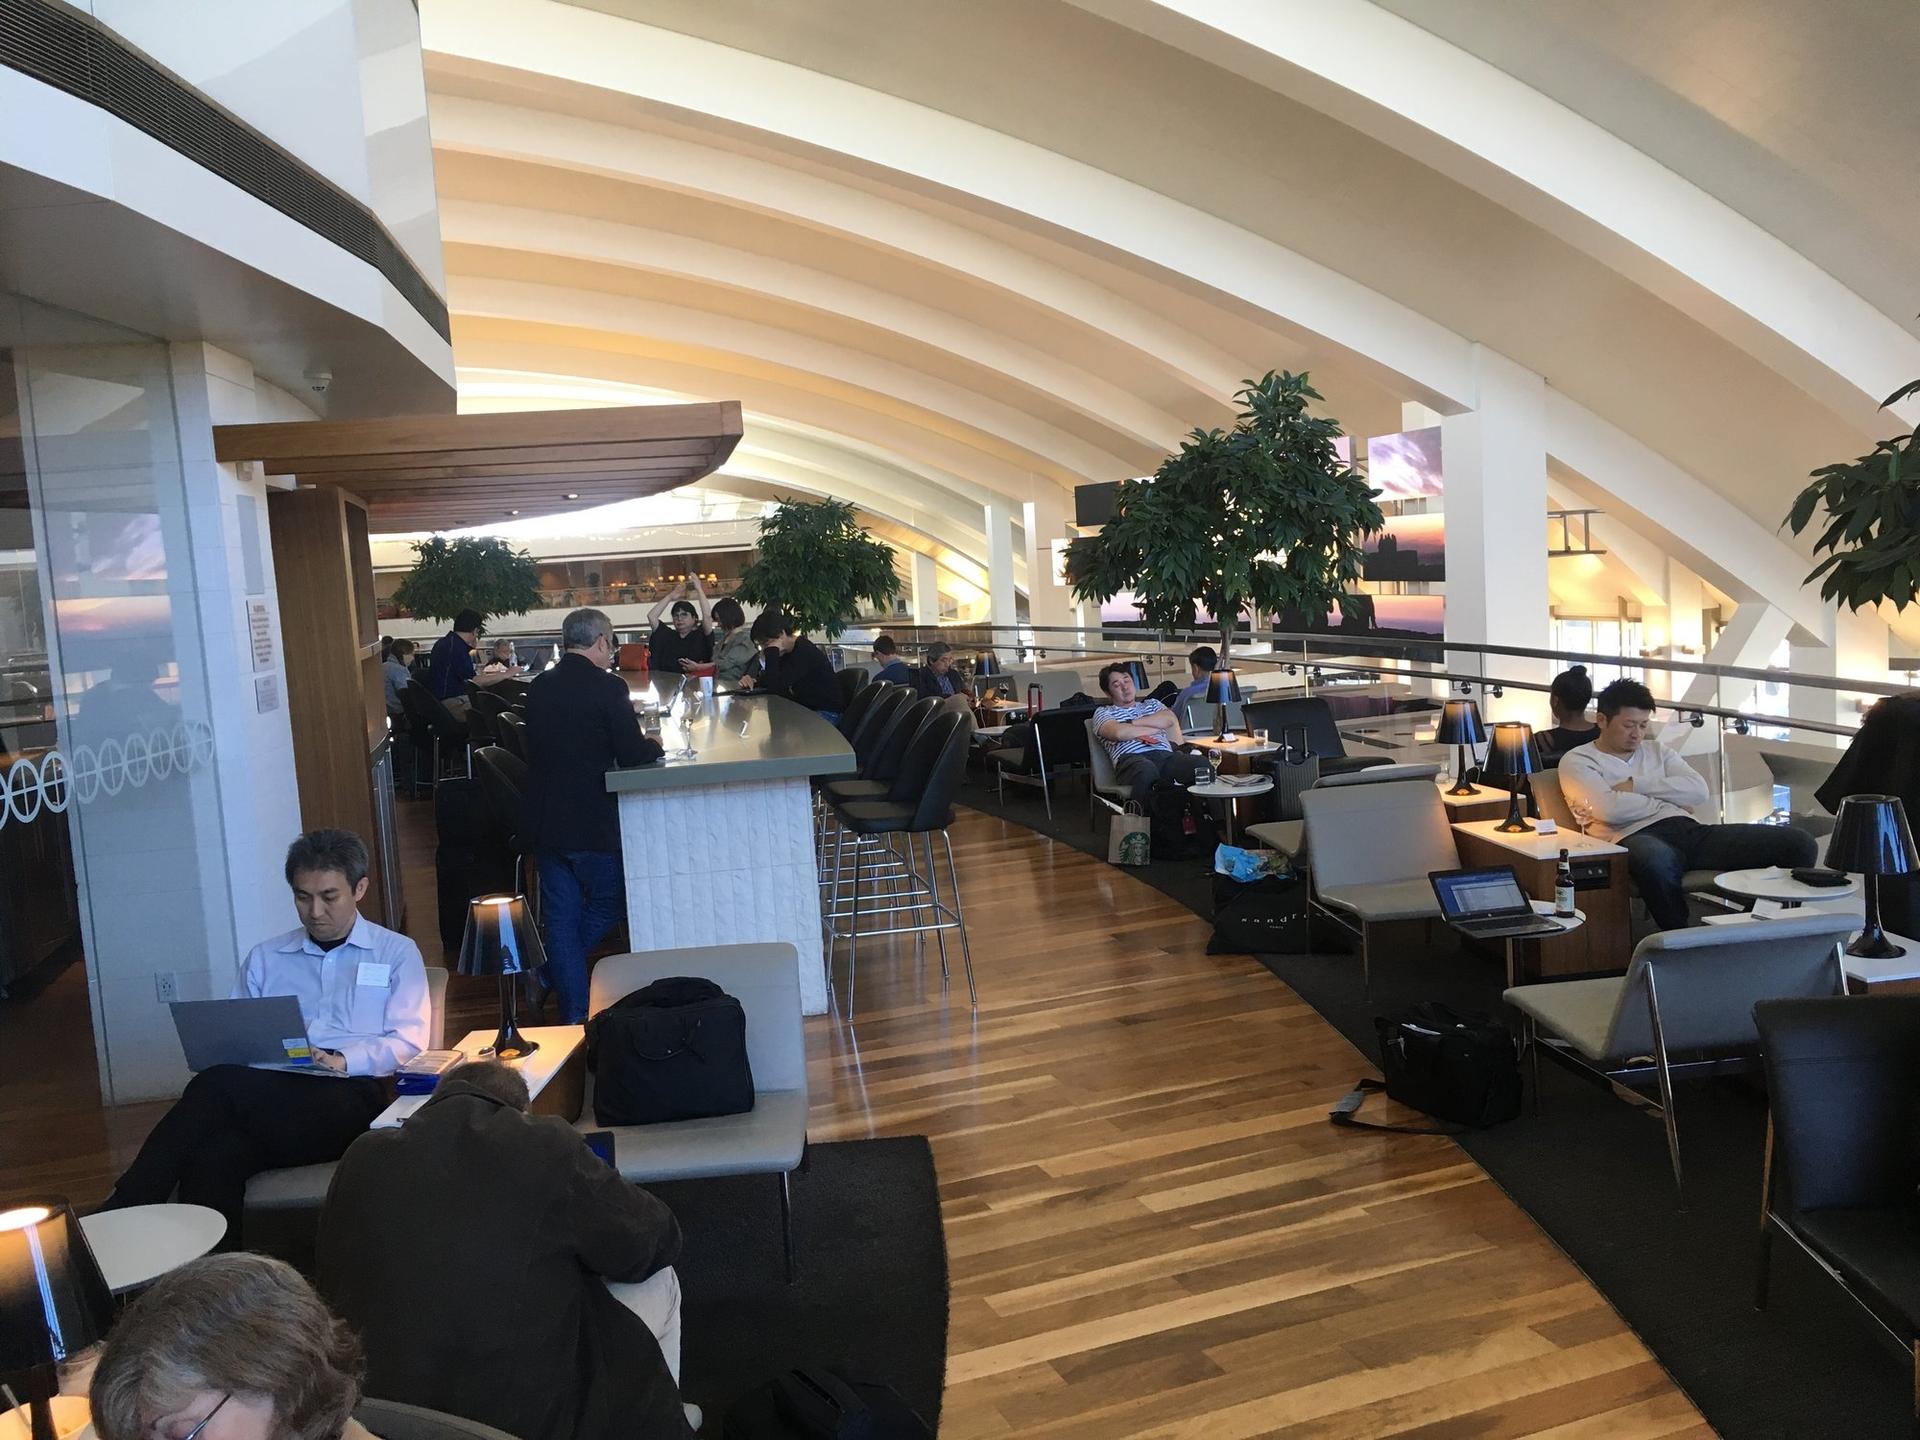 Star Alliance Business Class Lounge image 71 of 72